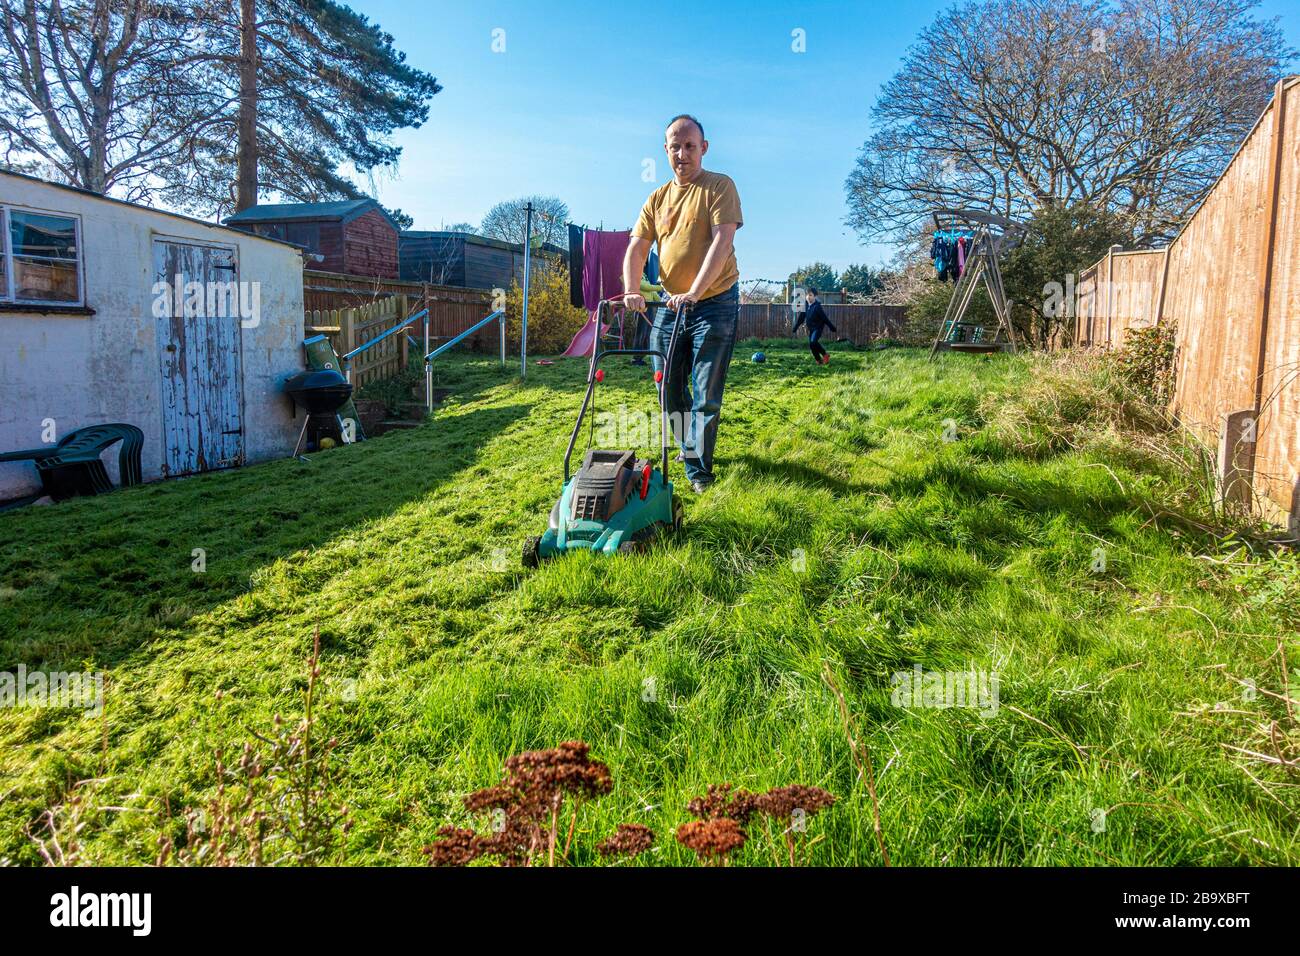 A man cuts the lawn in his back garden for the first time this year. The grass is long and untidy. The man pushes an electric lawnmower Stock Photo